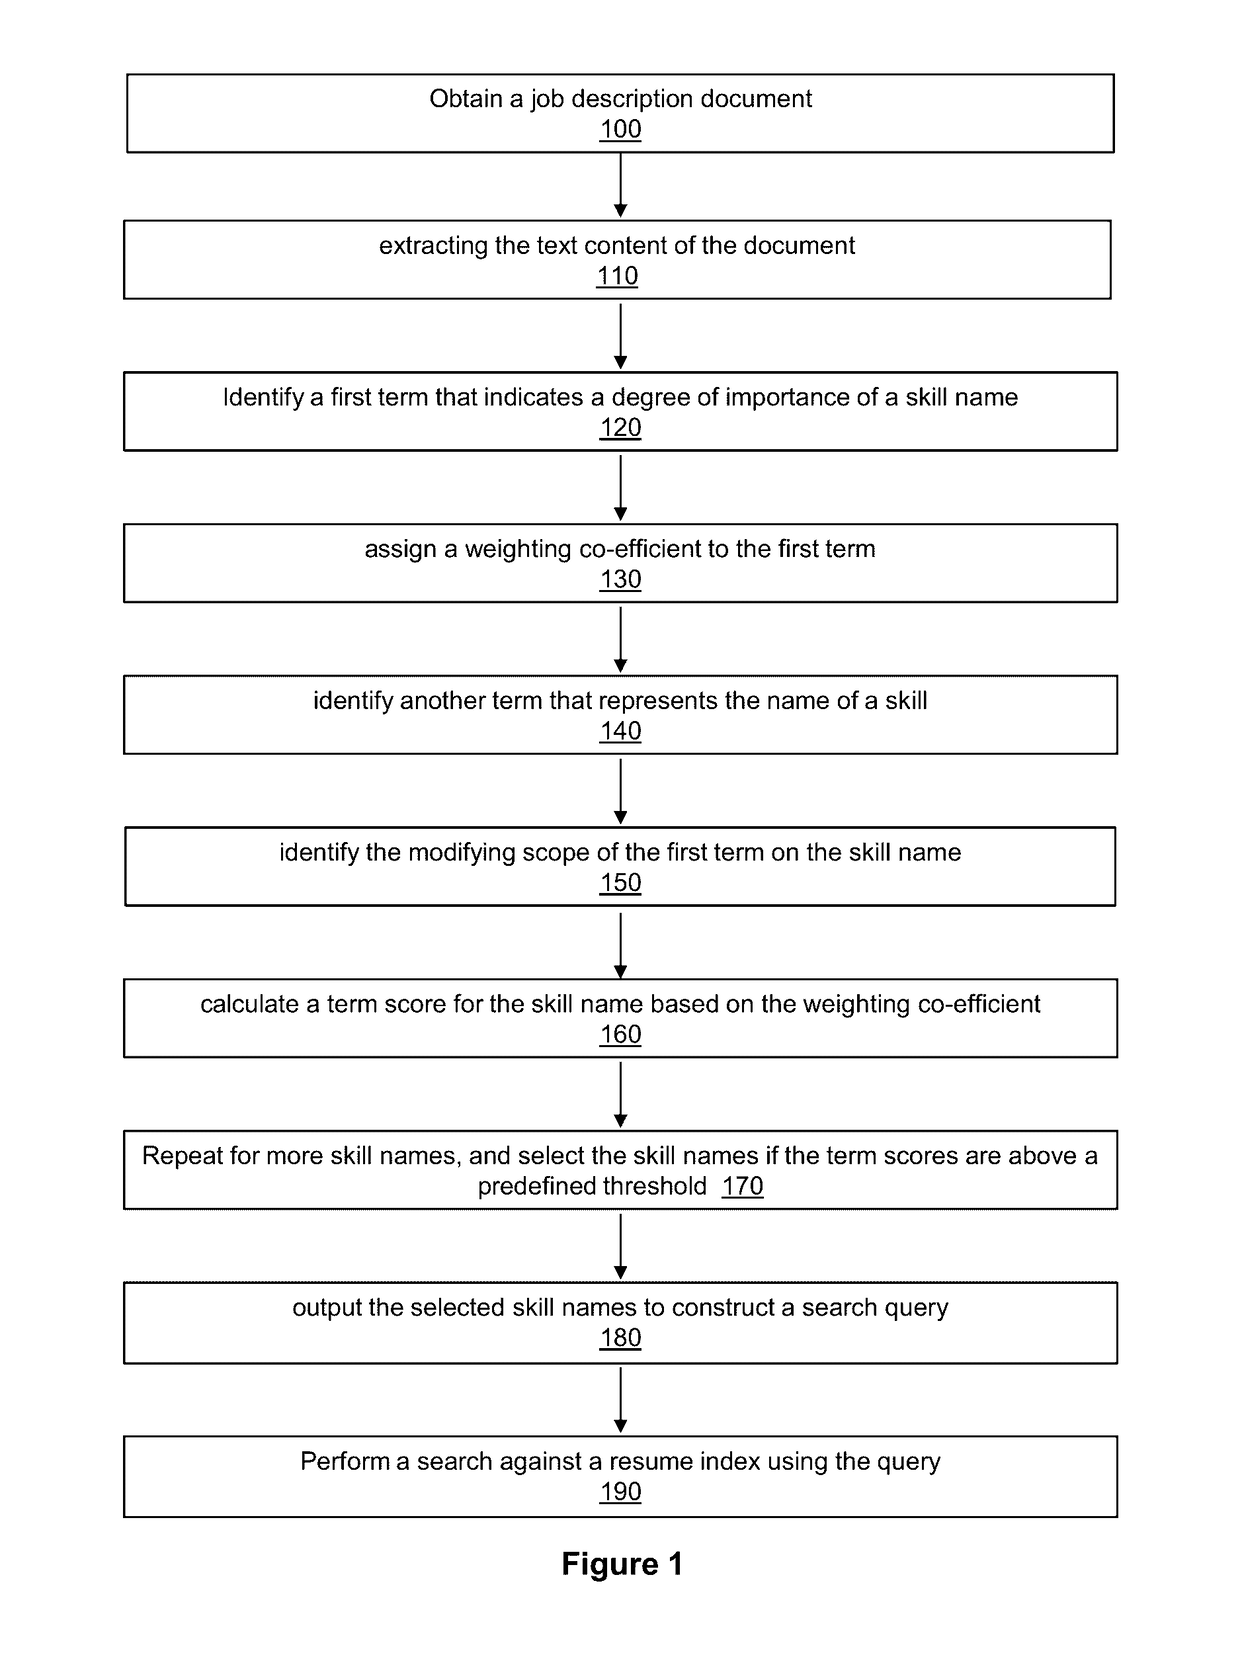 System, methods, and user interface for automated job search